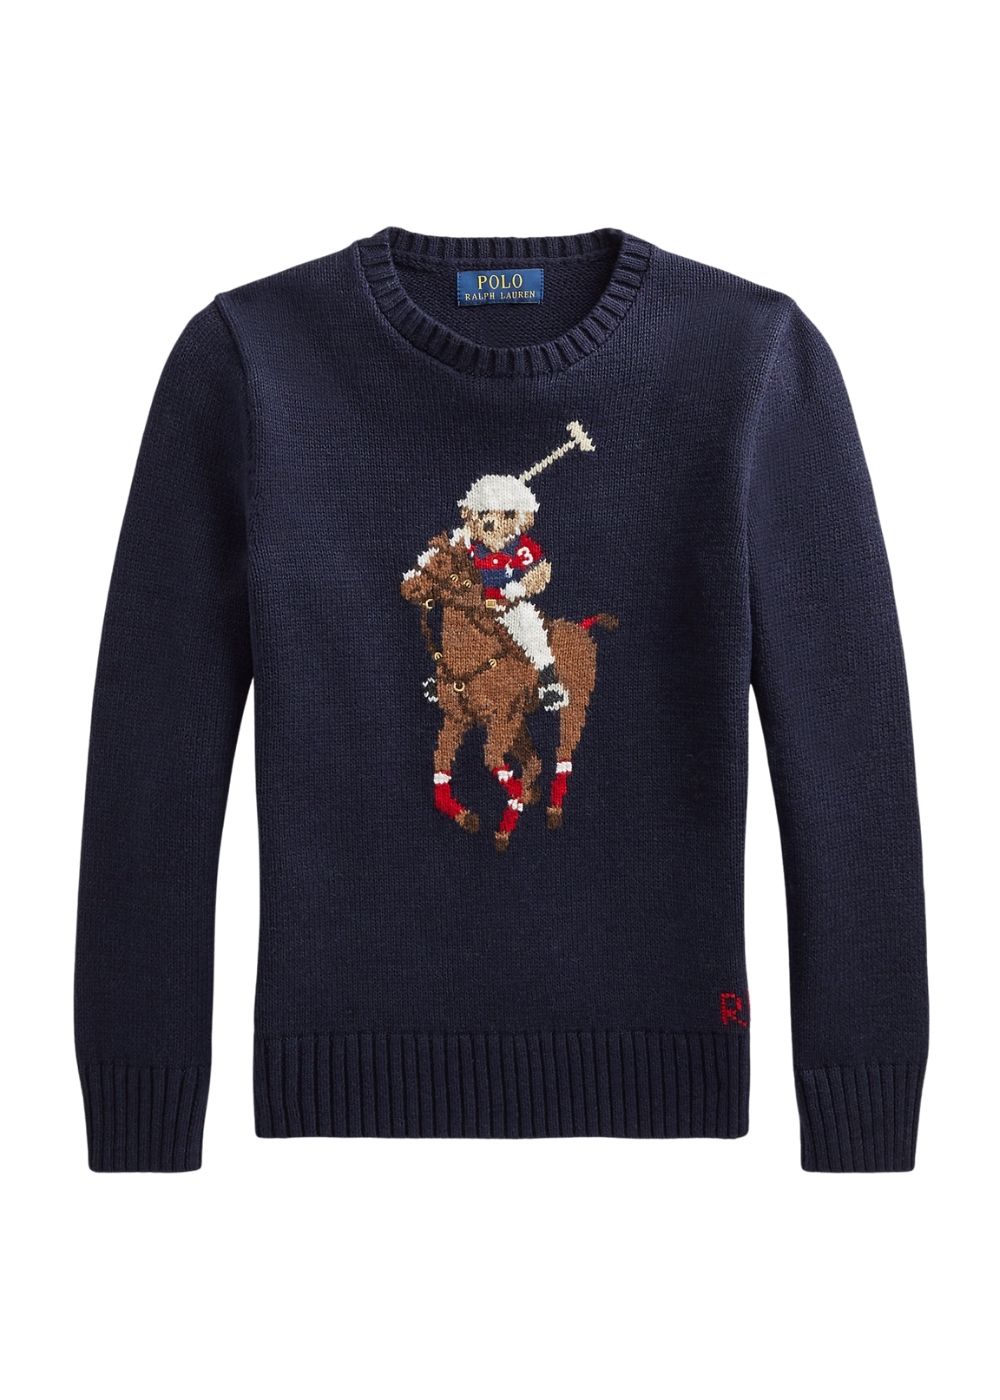 Featured image for “POLO RALPH LAUREN MAGLIA BIG PONY”